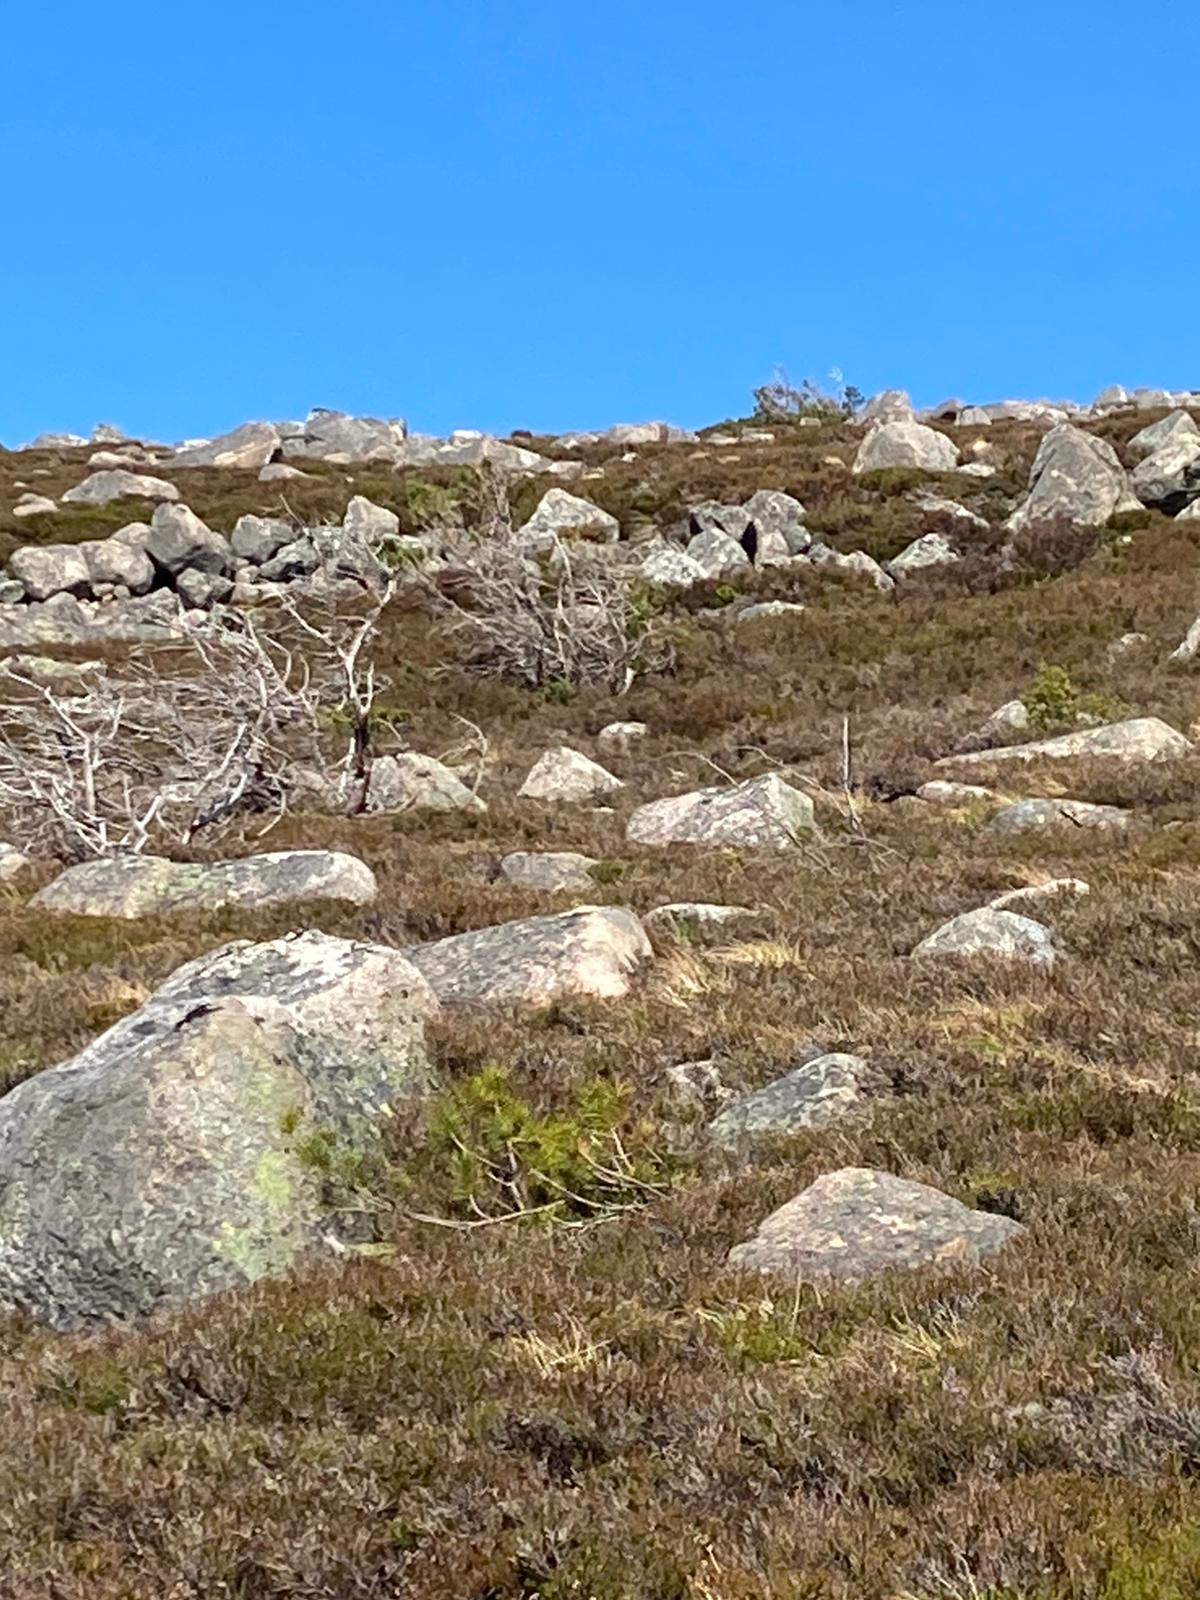 A gamekeeper wonders where the wildlife is as he walks on un-managed ground in the Cairngorms.